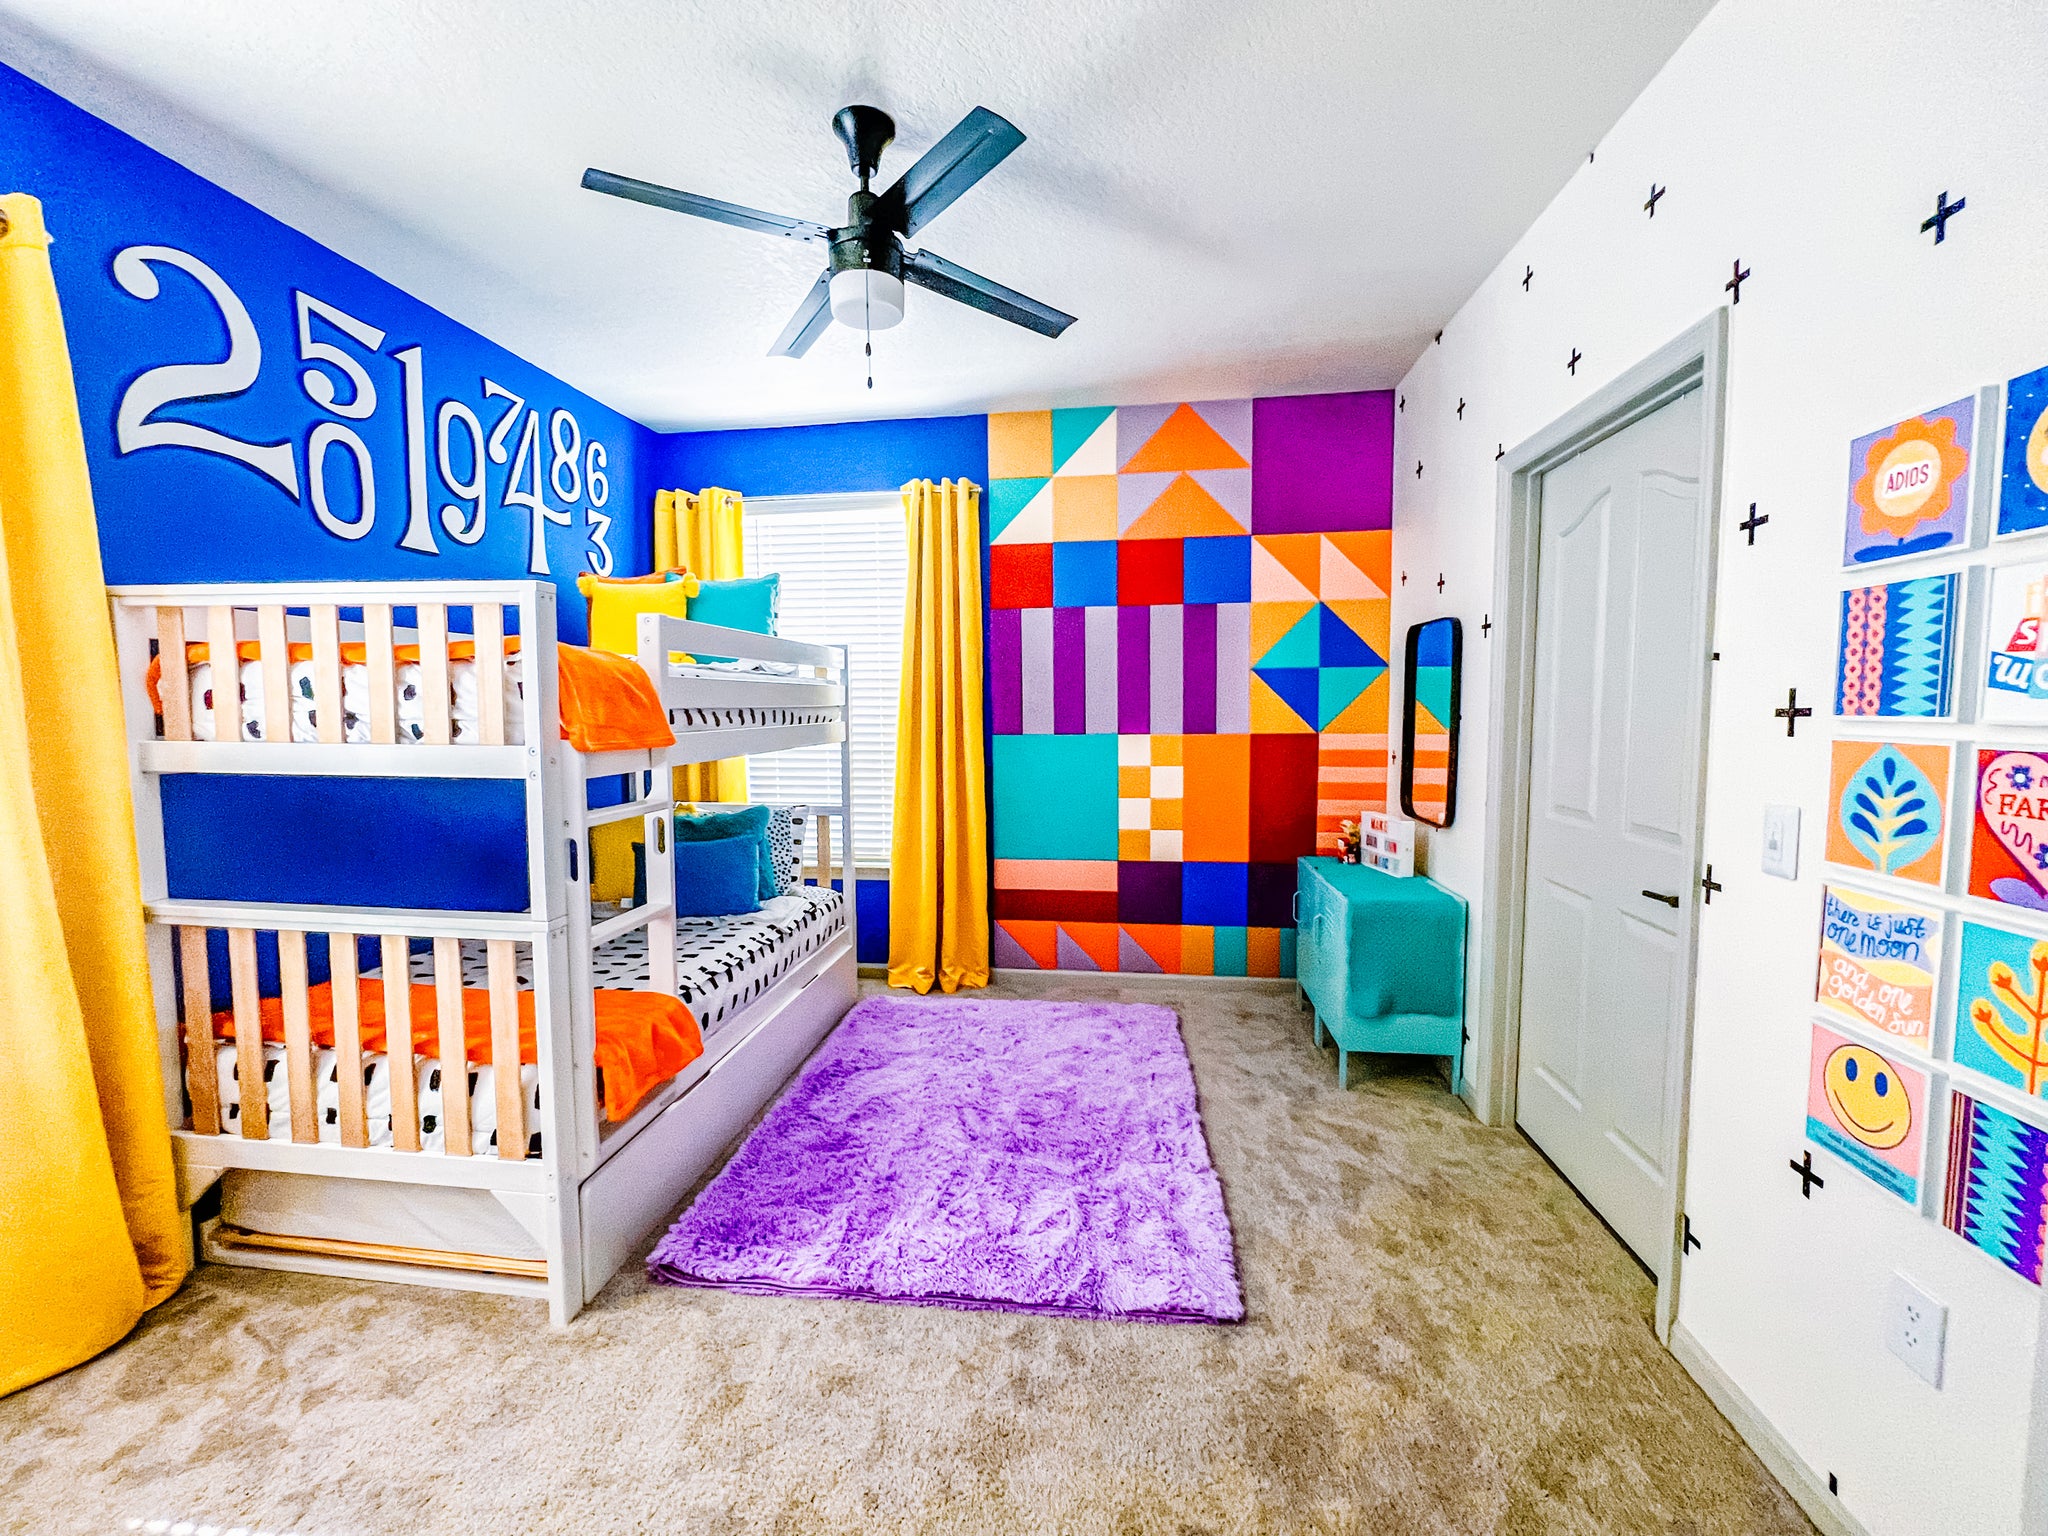 Bedroom with ceiling fan, yellow curtains over two windows, and a purple rug. Geometric Felt Right tiles on back wall, photo collage on right wall, and giant number decals on the left wall.